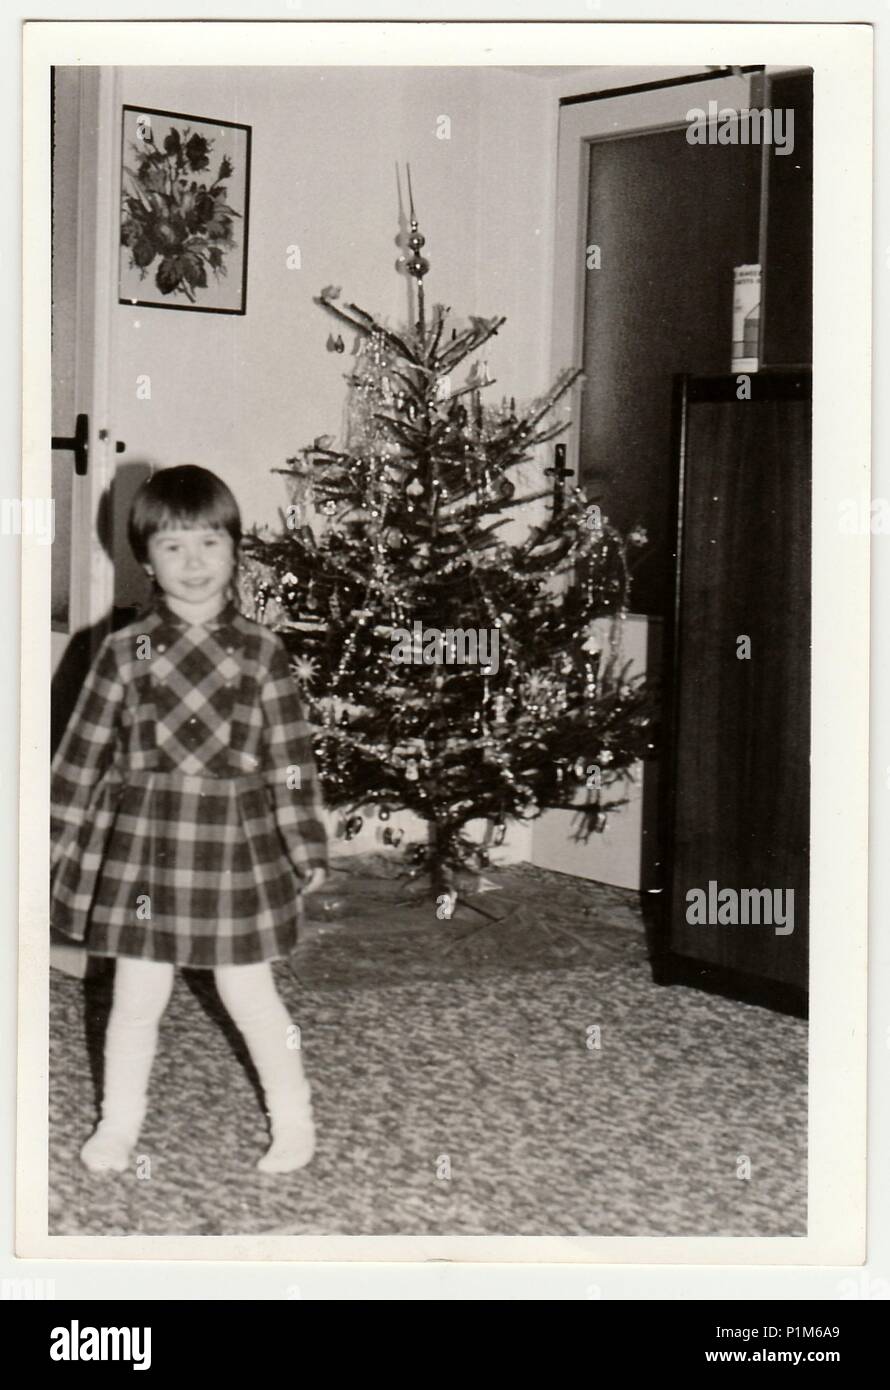 THE CZECHOSLOVAK SOCIALIST REPUBLIC - CIRCA 1970s: Retro photo shows small girl during Christmas. Christmas tree is on background.  Black & white vintage photography. Stock Photo